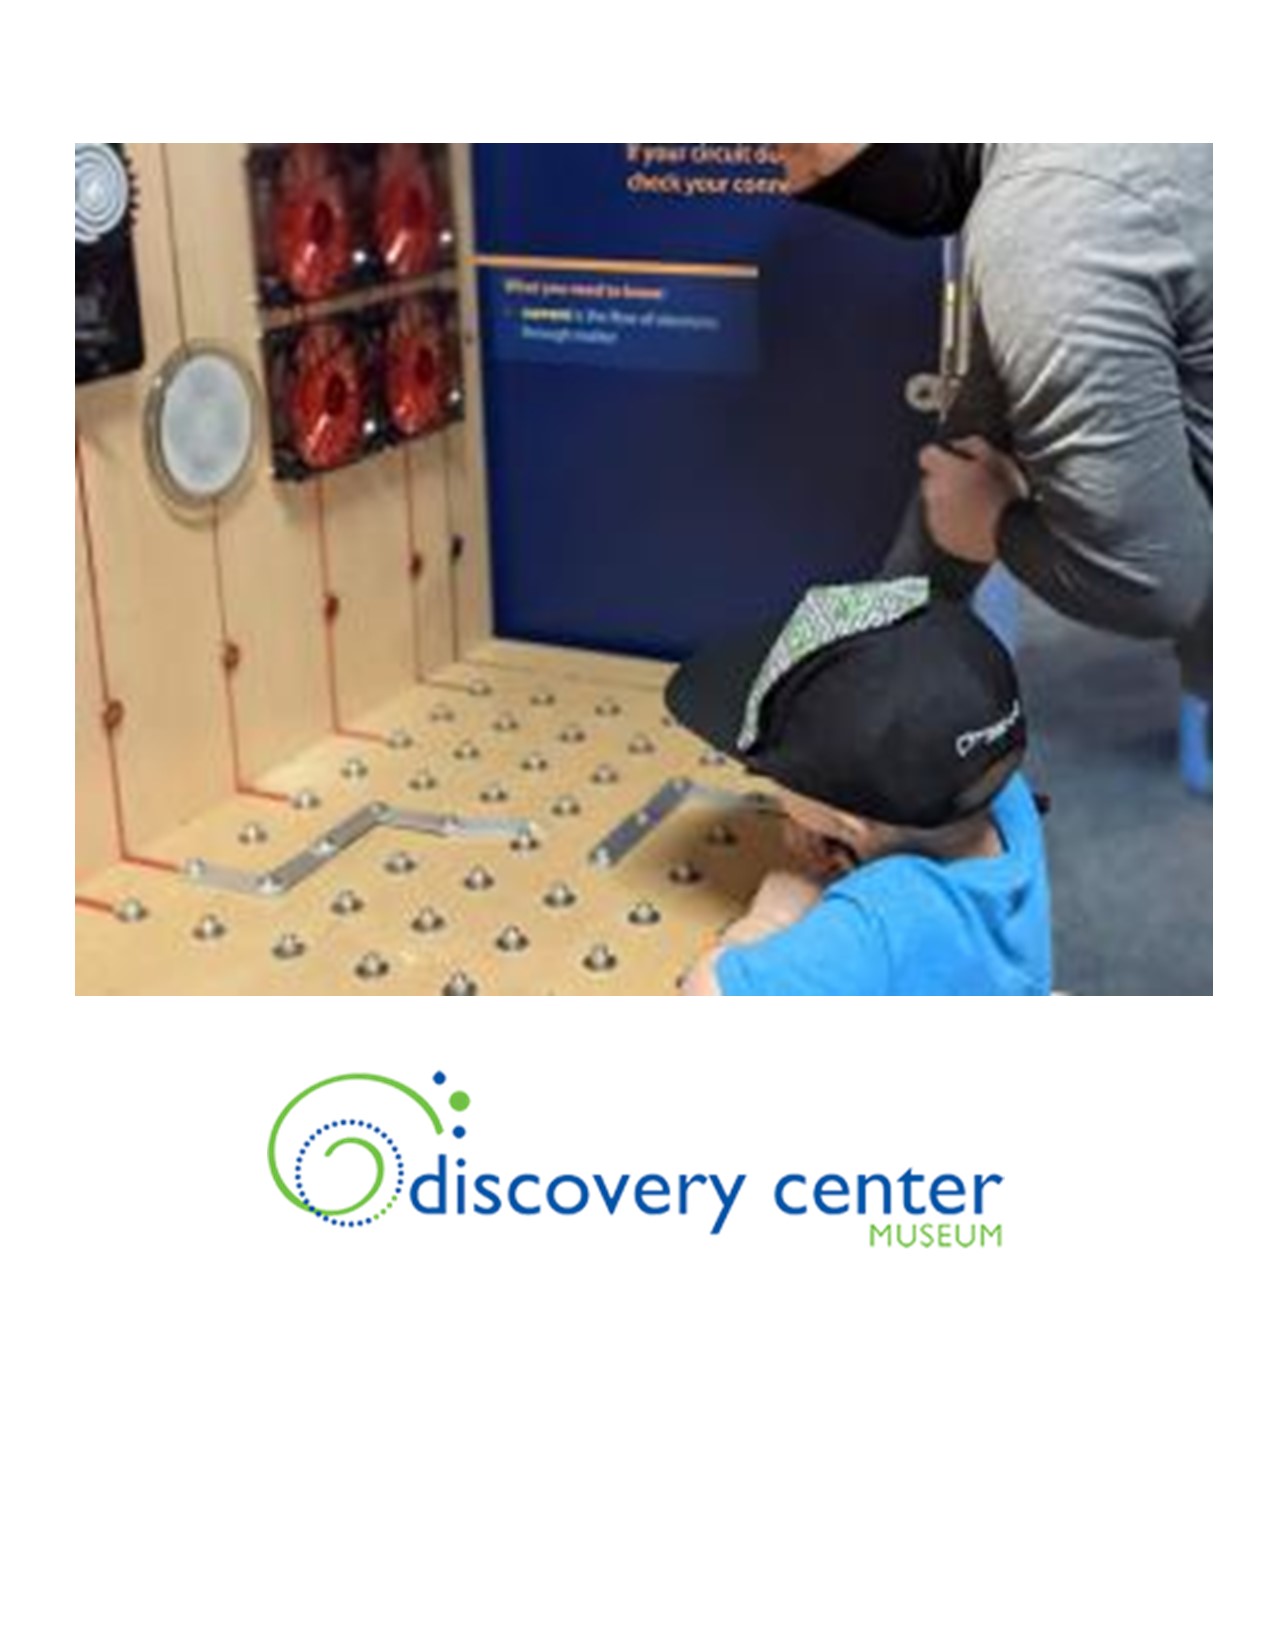 Discovery Center pic and logo